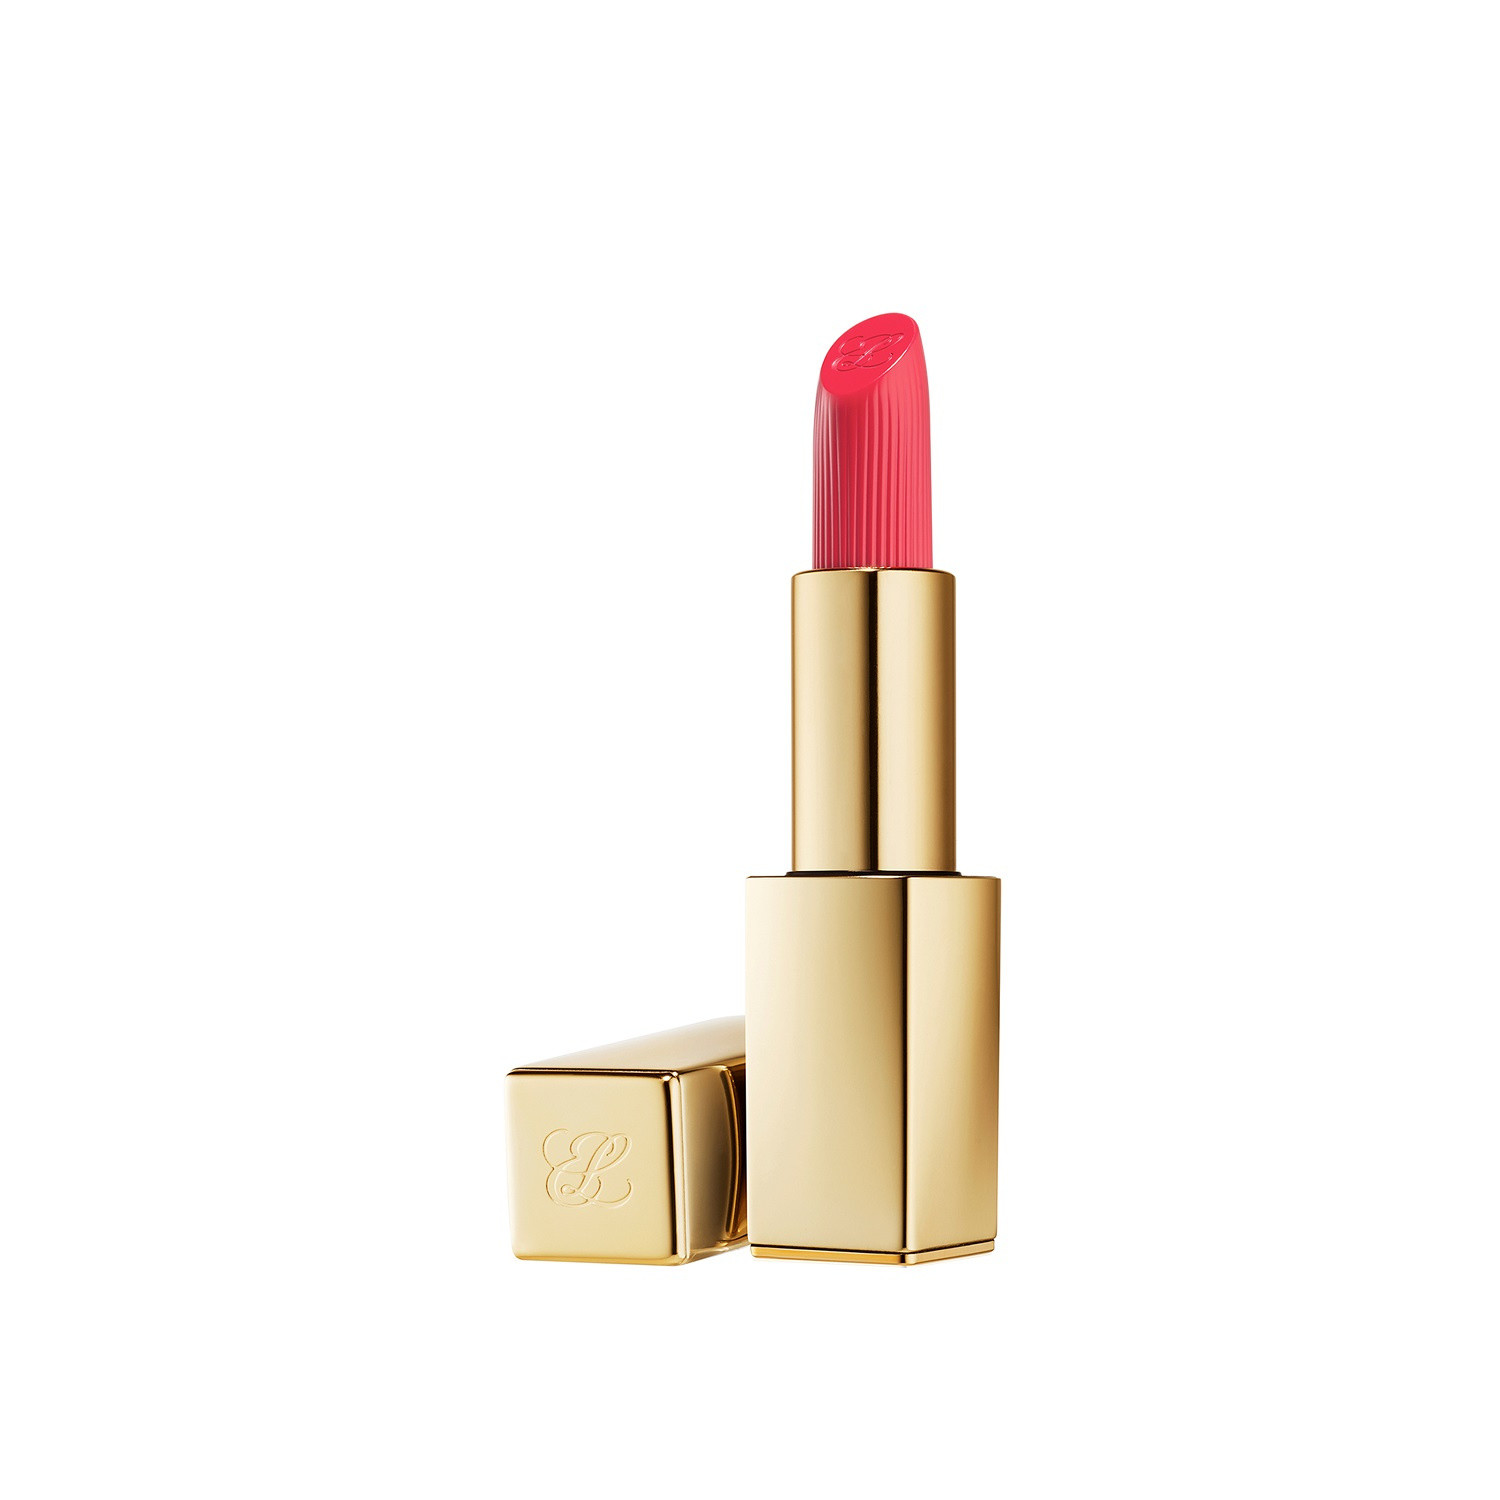 PURE COLOR creme lipstick - 320 Defiant Coral, Red, large image number 0